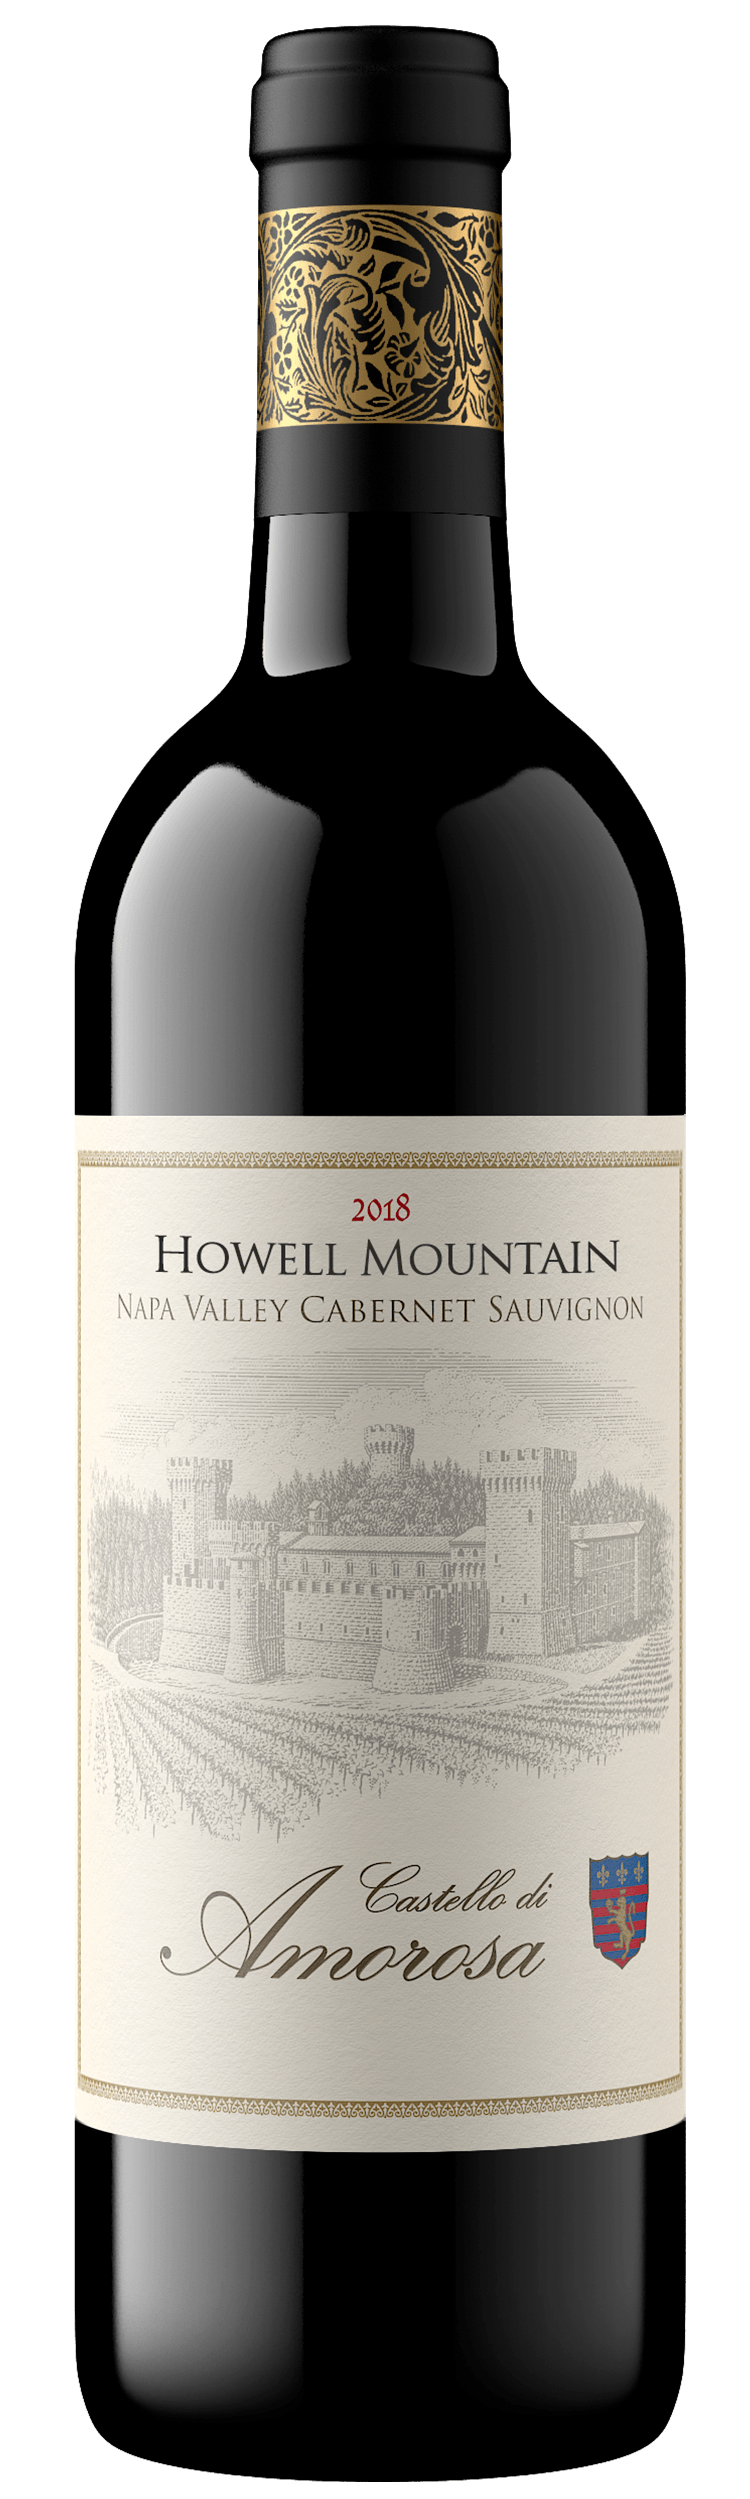 Howell Mountain Cabernet